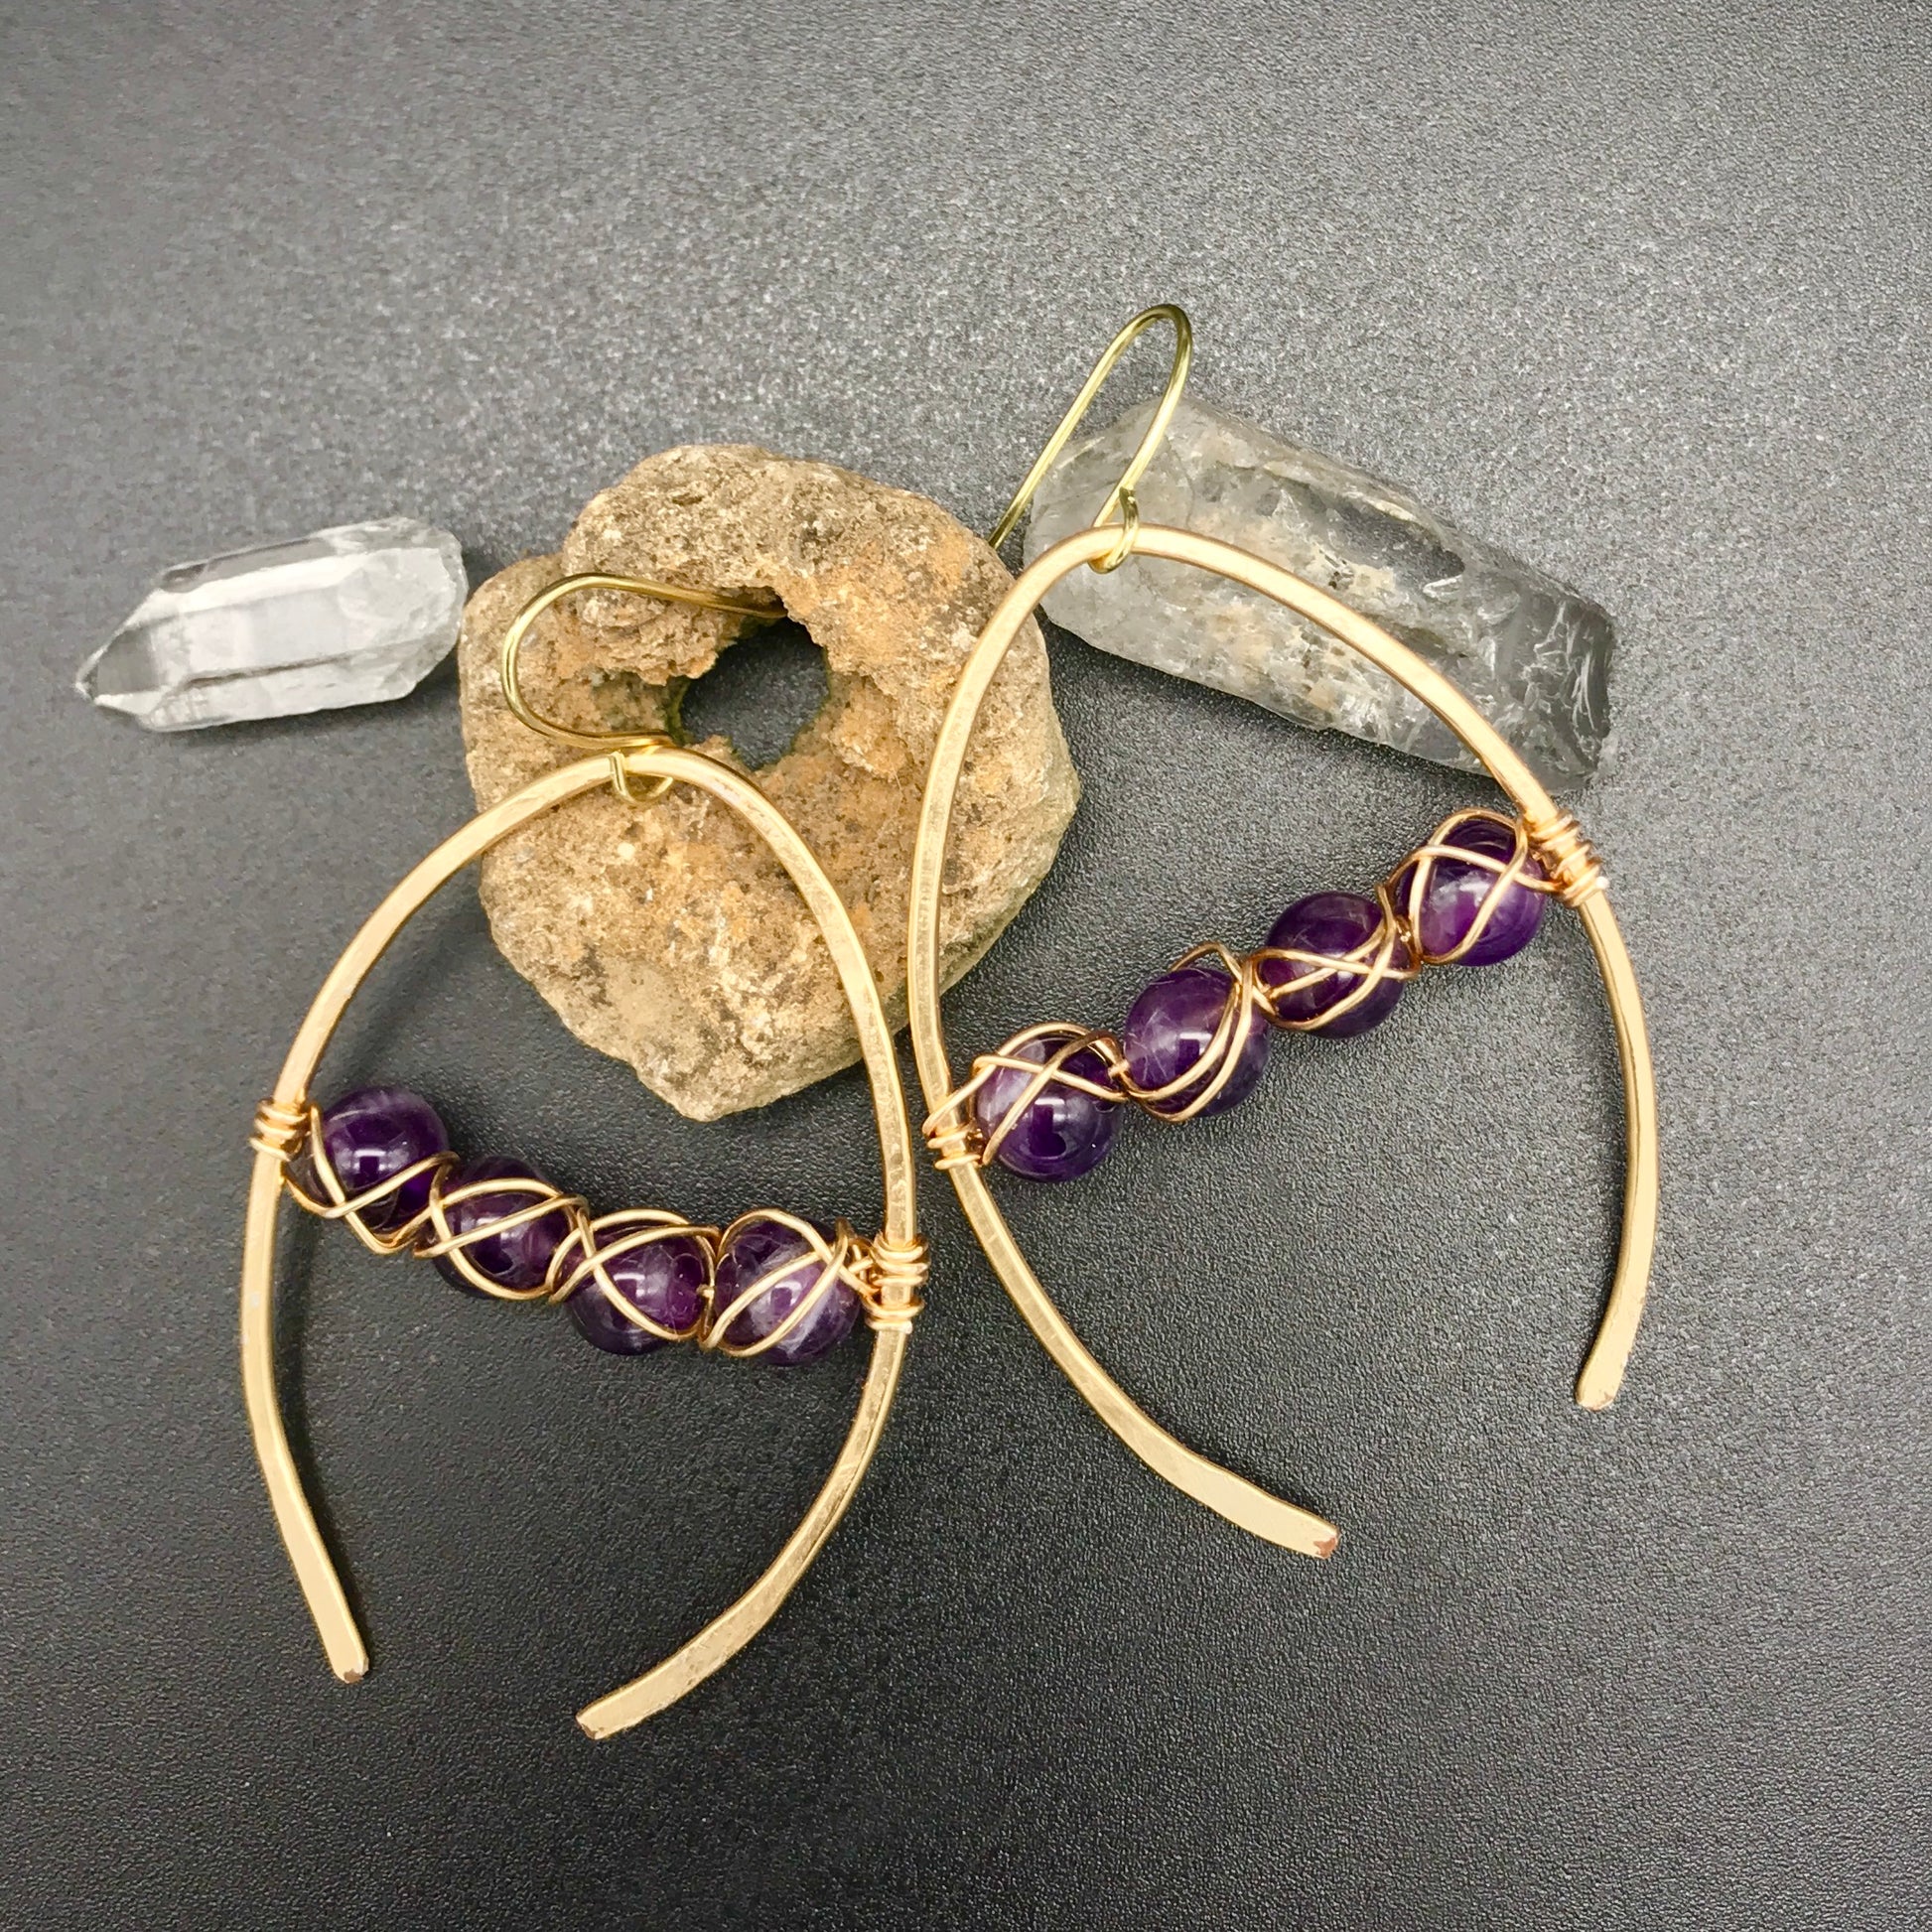 Wishbone shaped earrings in gold with woven amethyst beads. Rocking Glass Studio